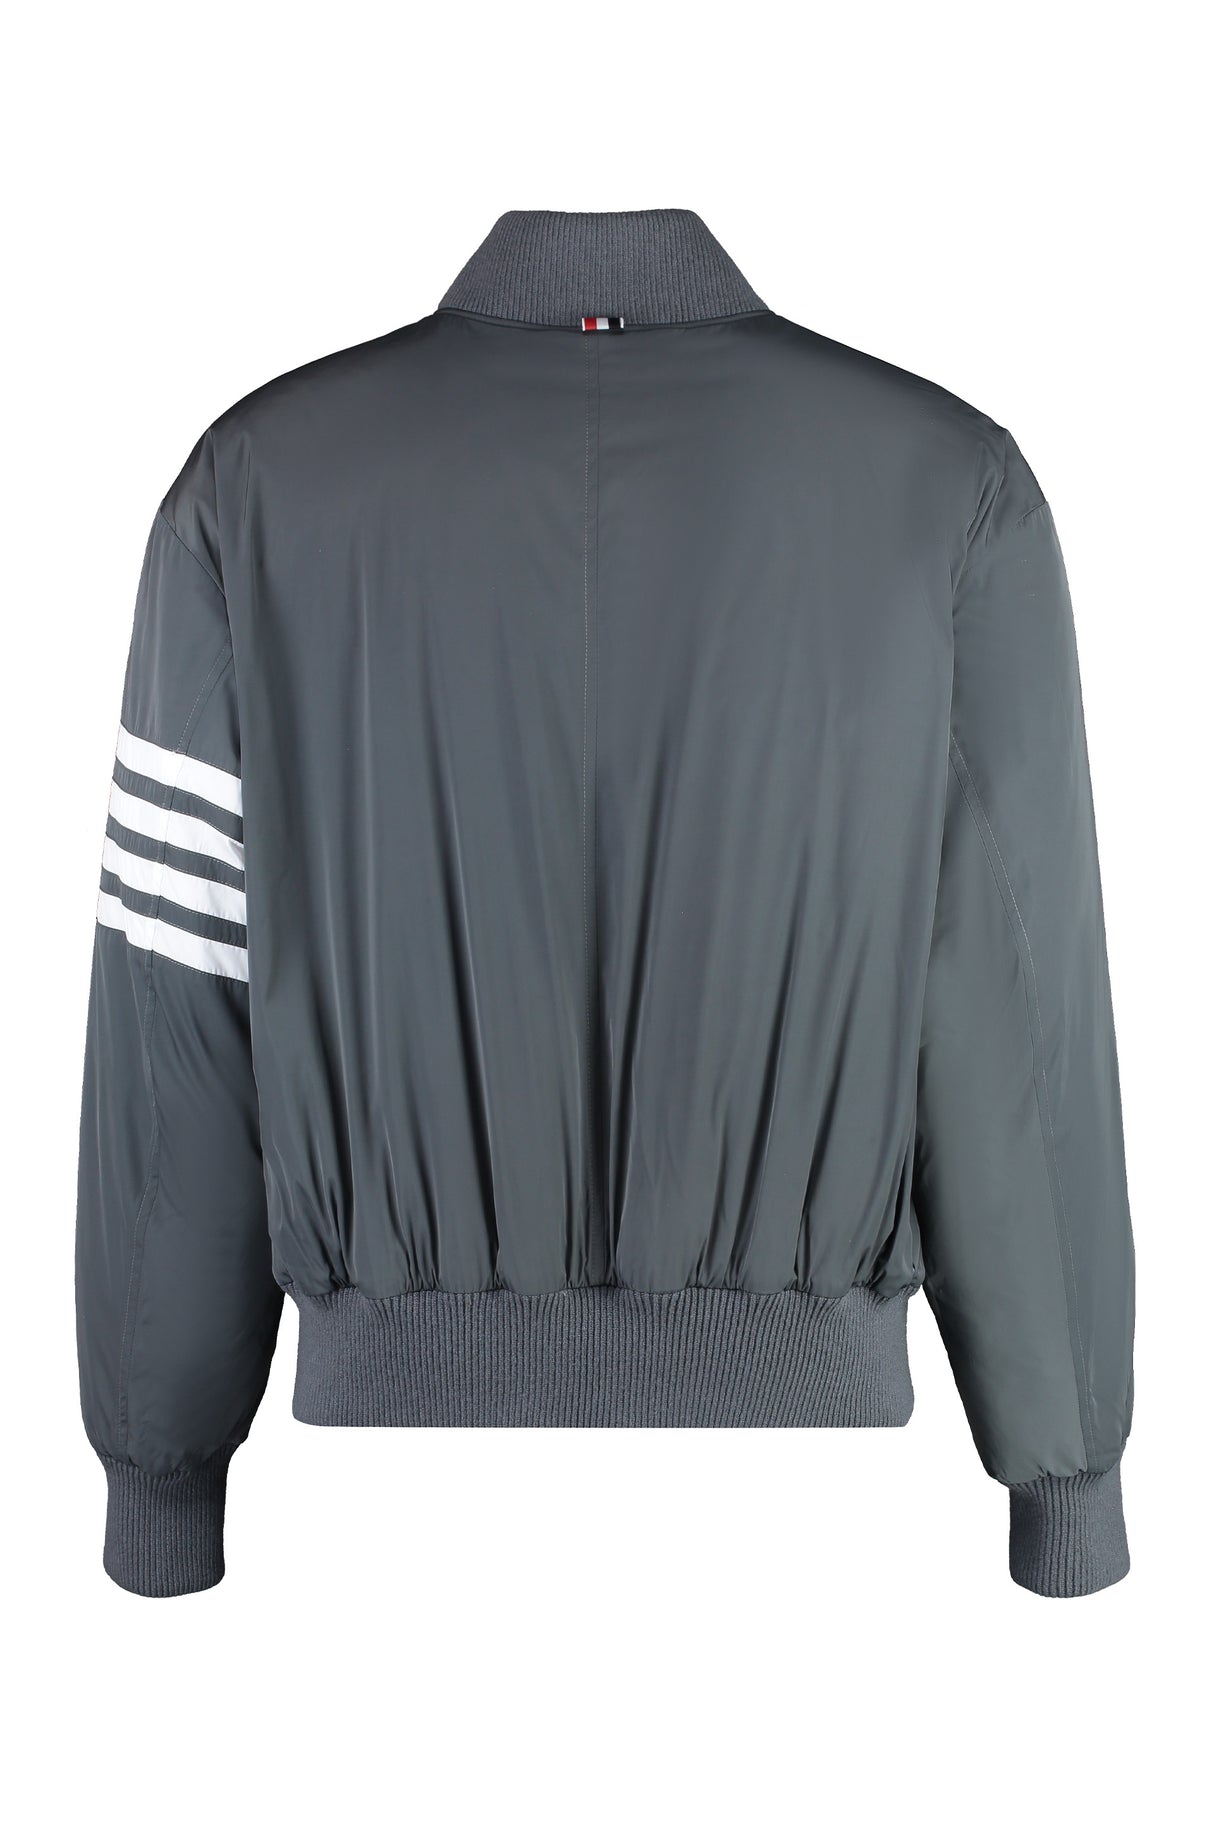 THOM BROWNE Men's Gray Bomber Jacket with Striped Sleeve Detail and Down Padding for SS23